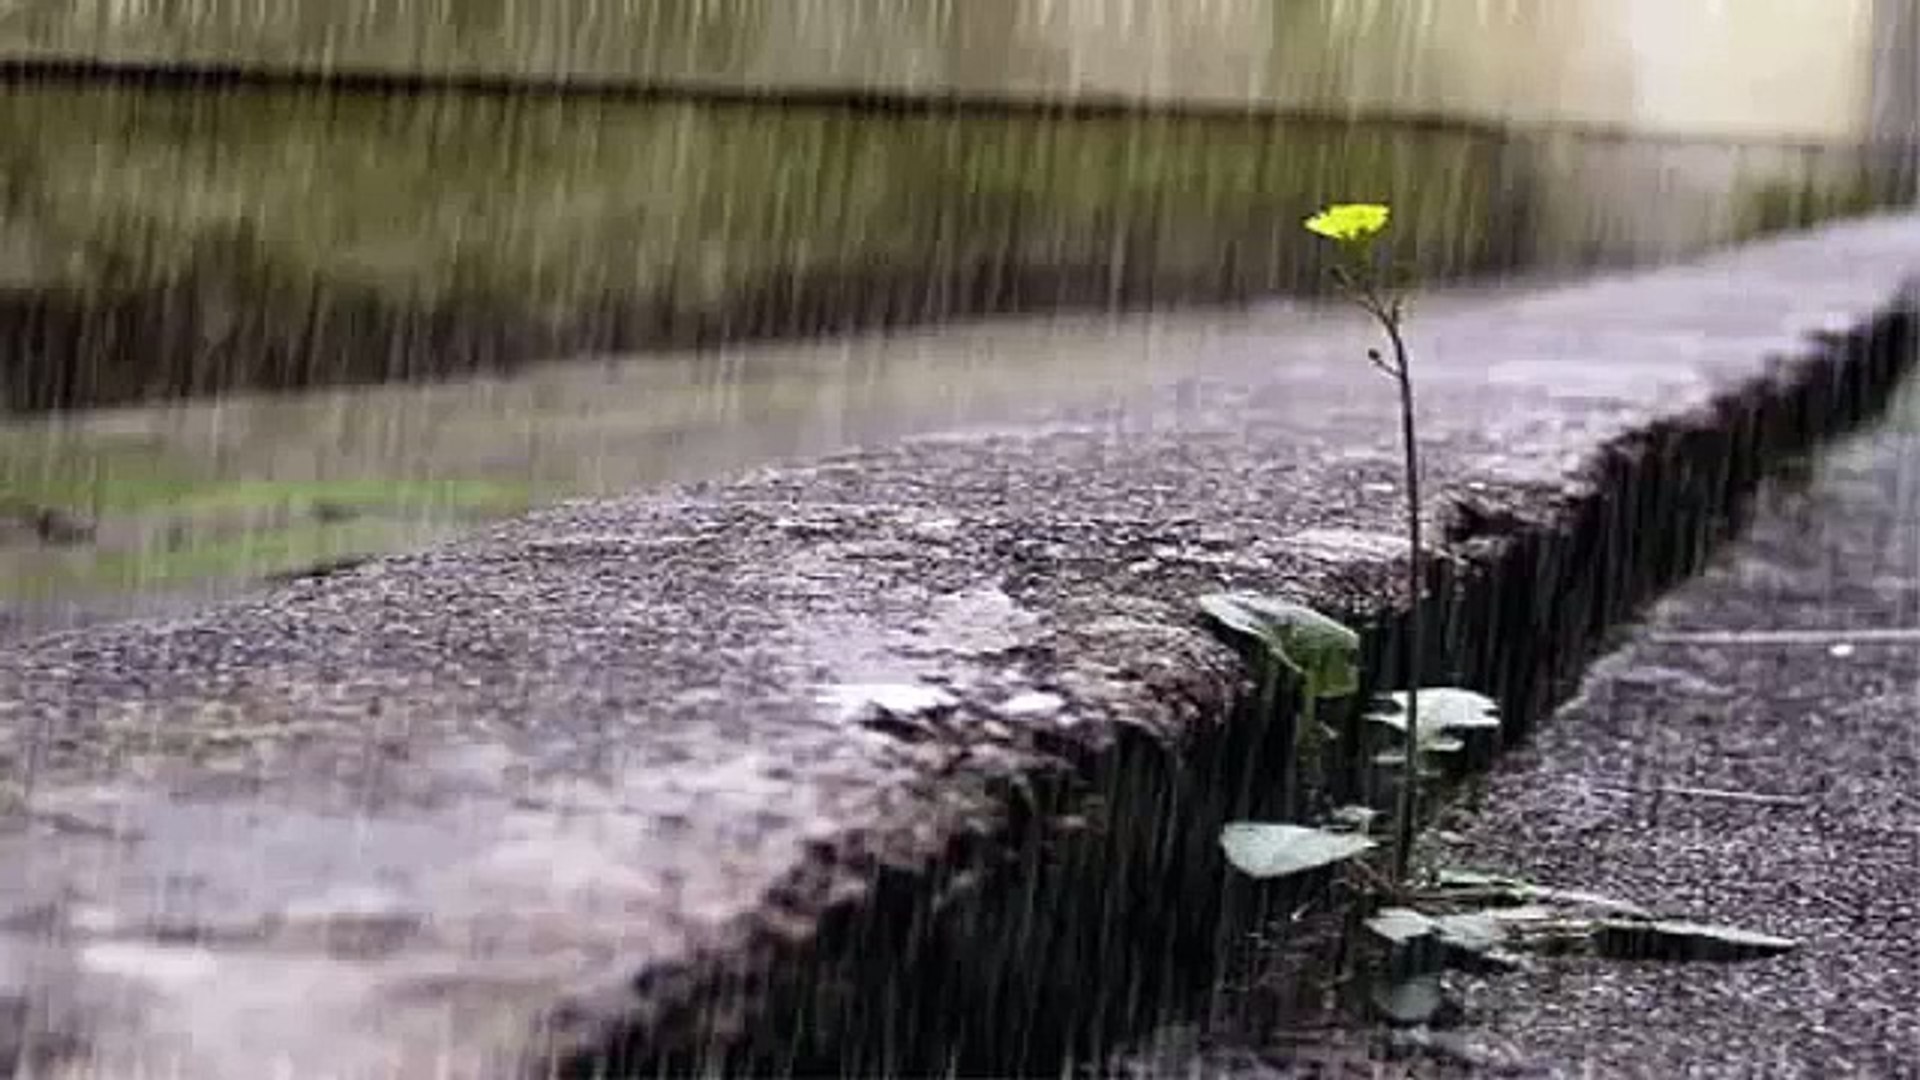 Relaxing Music - Massage Music - Spa Music - Soothing Music - Calming Music - Relaxation - ( rain )